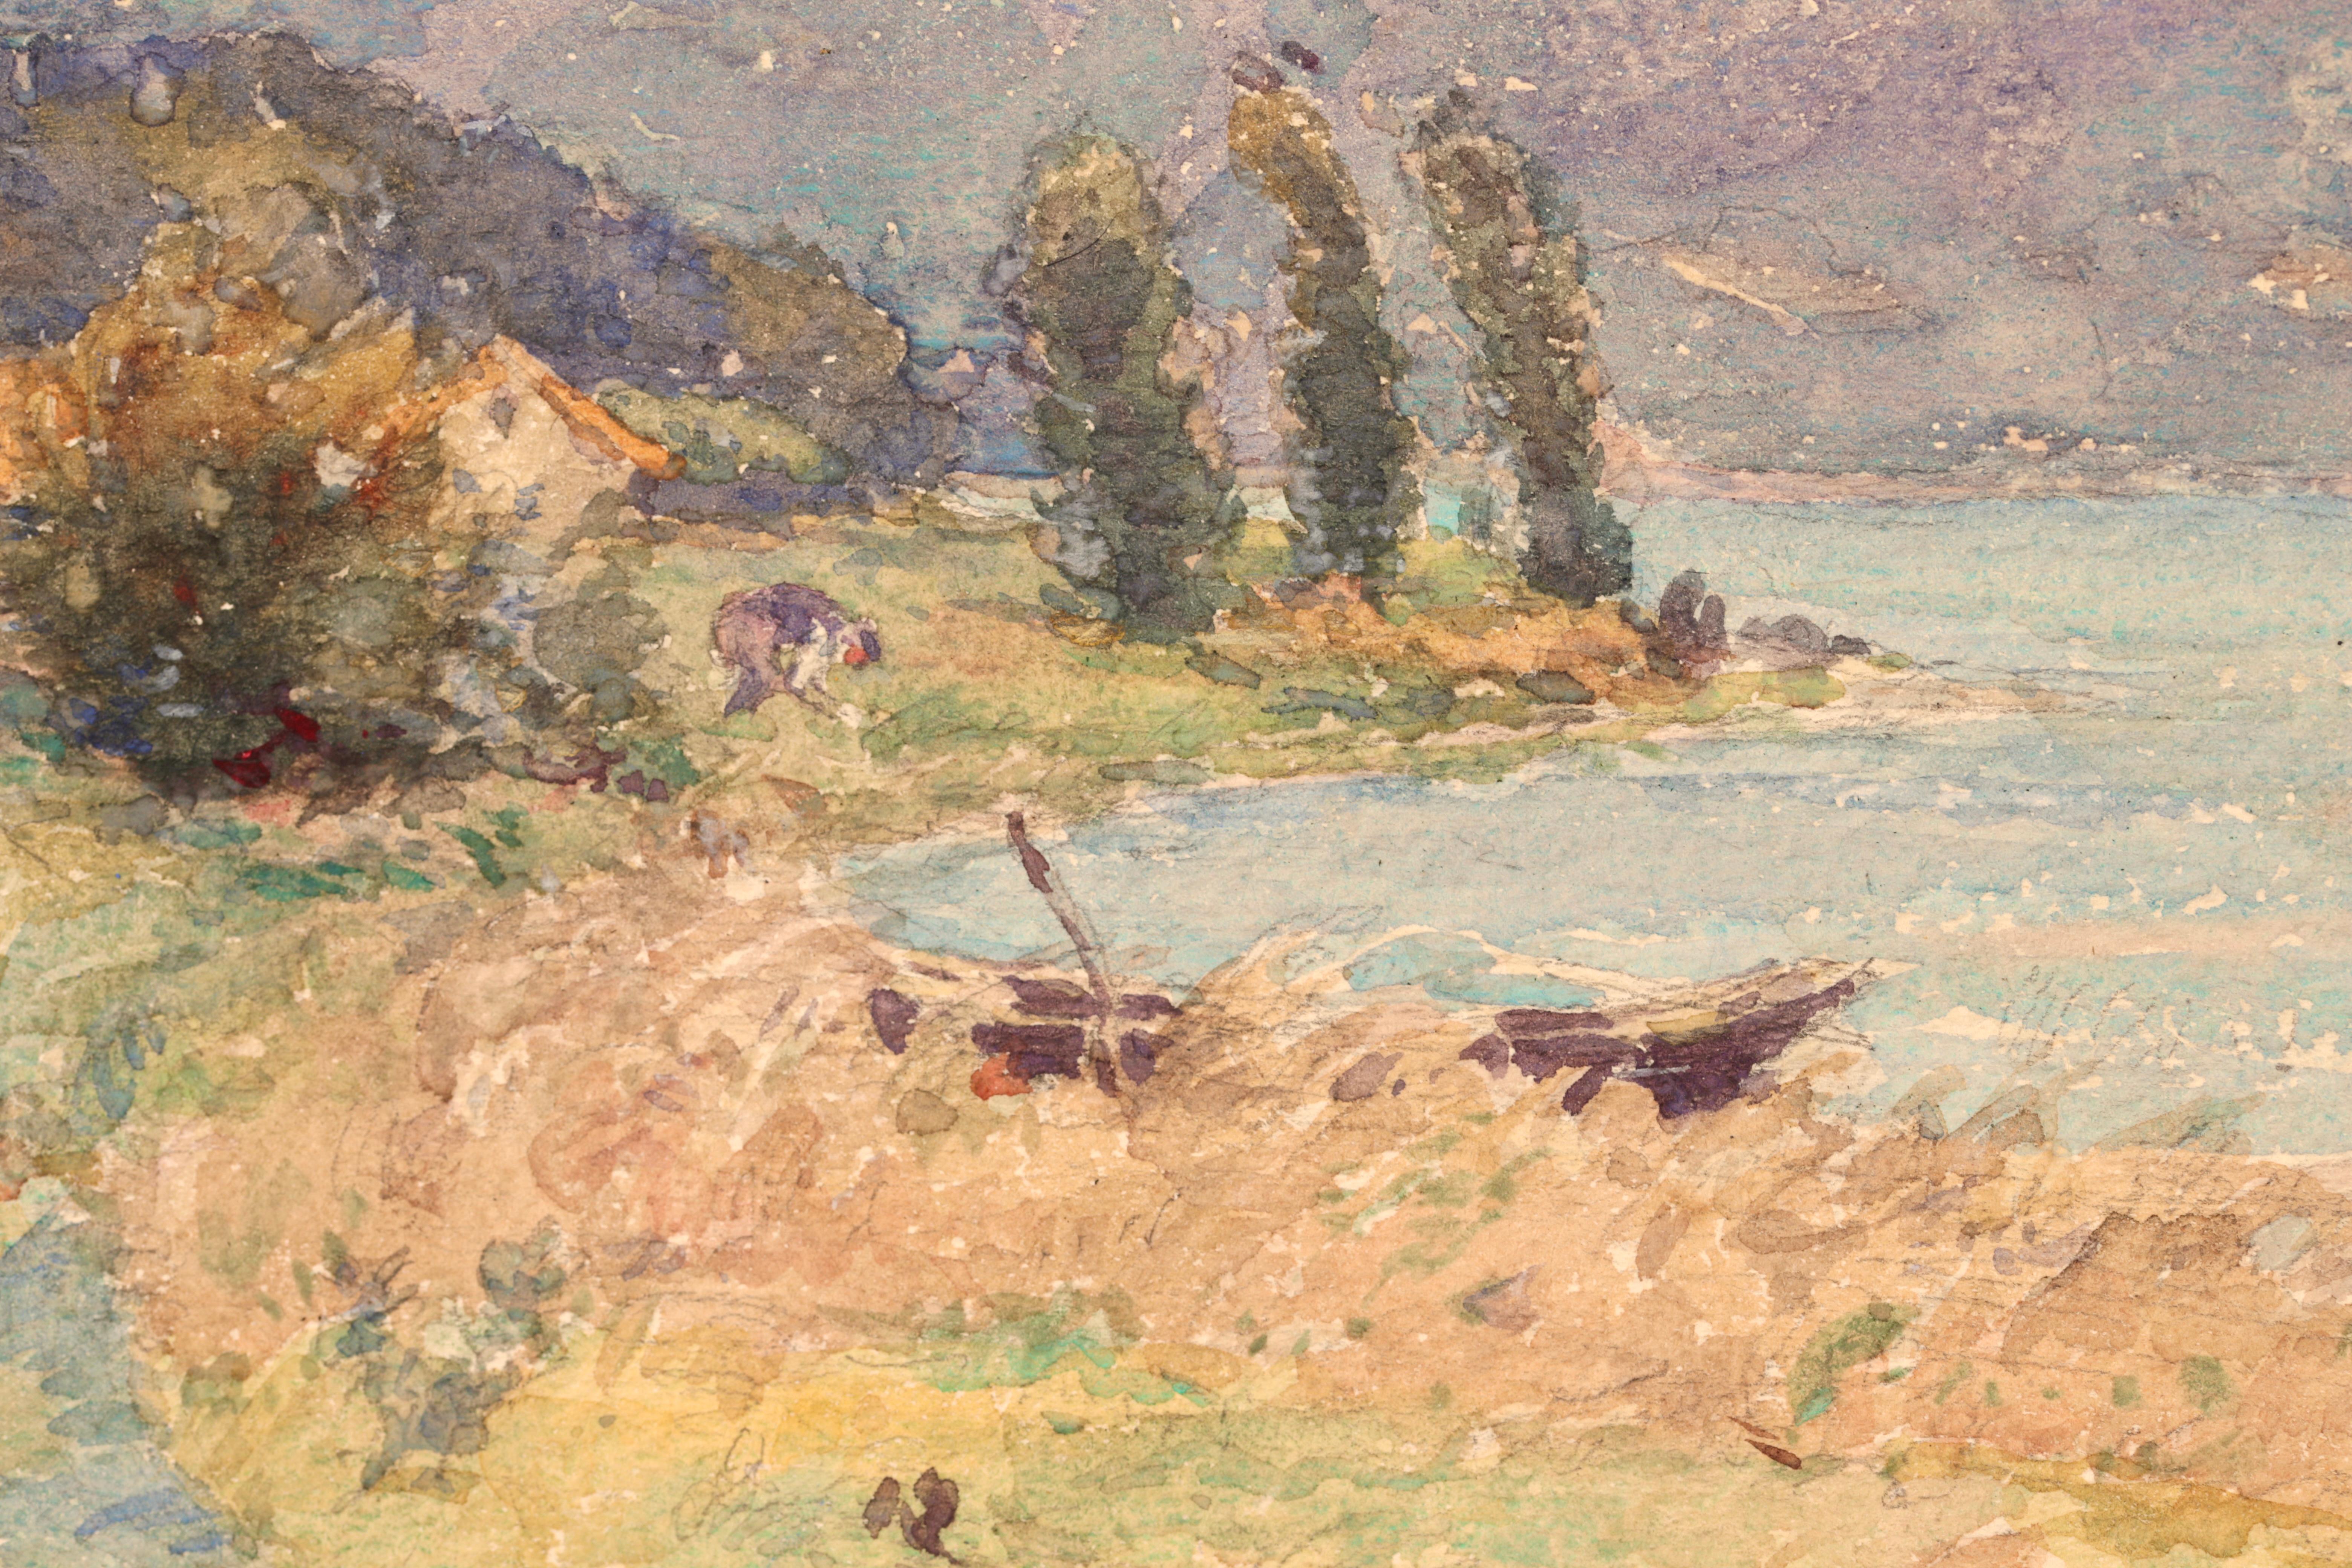 Signed impressionist figure in landscape watercolour on paper circa 1920 by Henri Duhem. This beautiful work depicts a view of a lake with banks of green trees beside it and blue mountains beyond. There is a man beside a boat house in the centre of